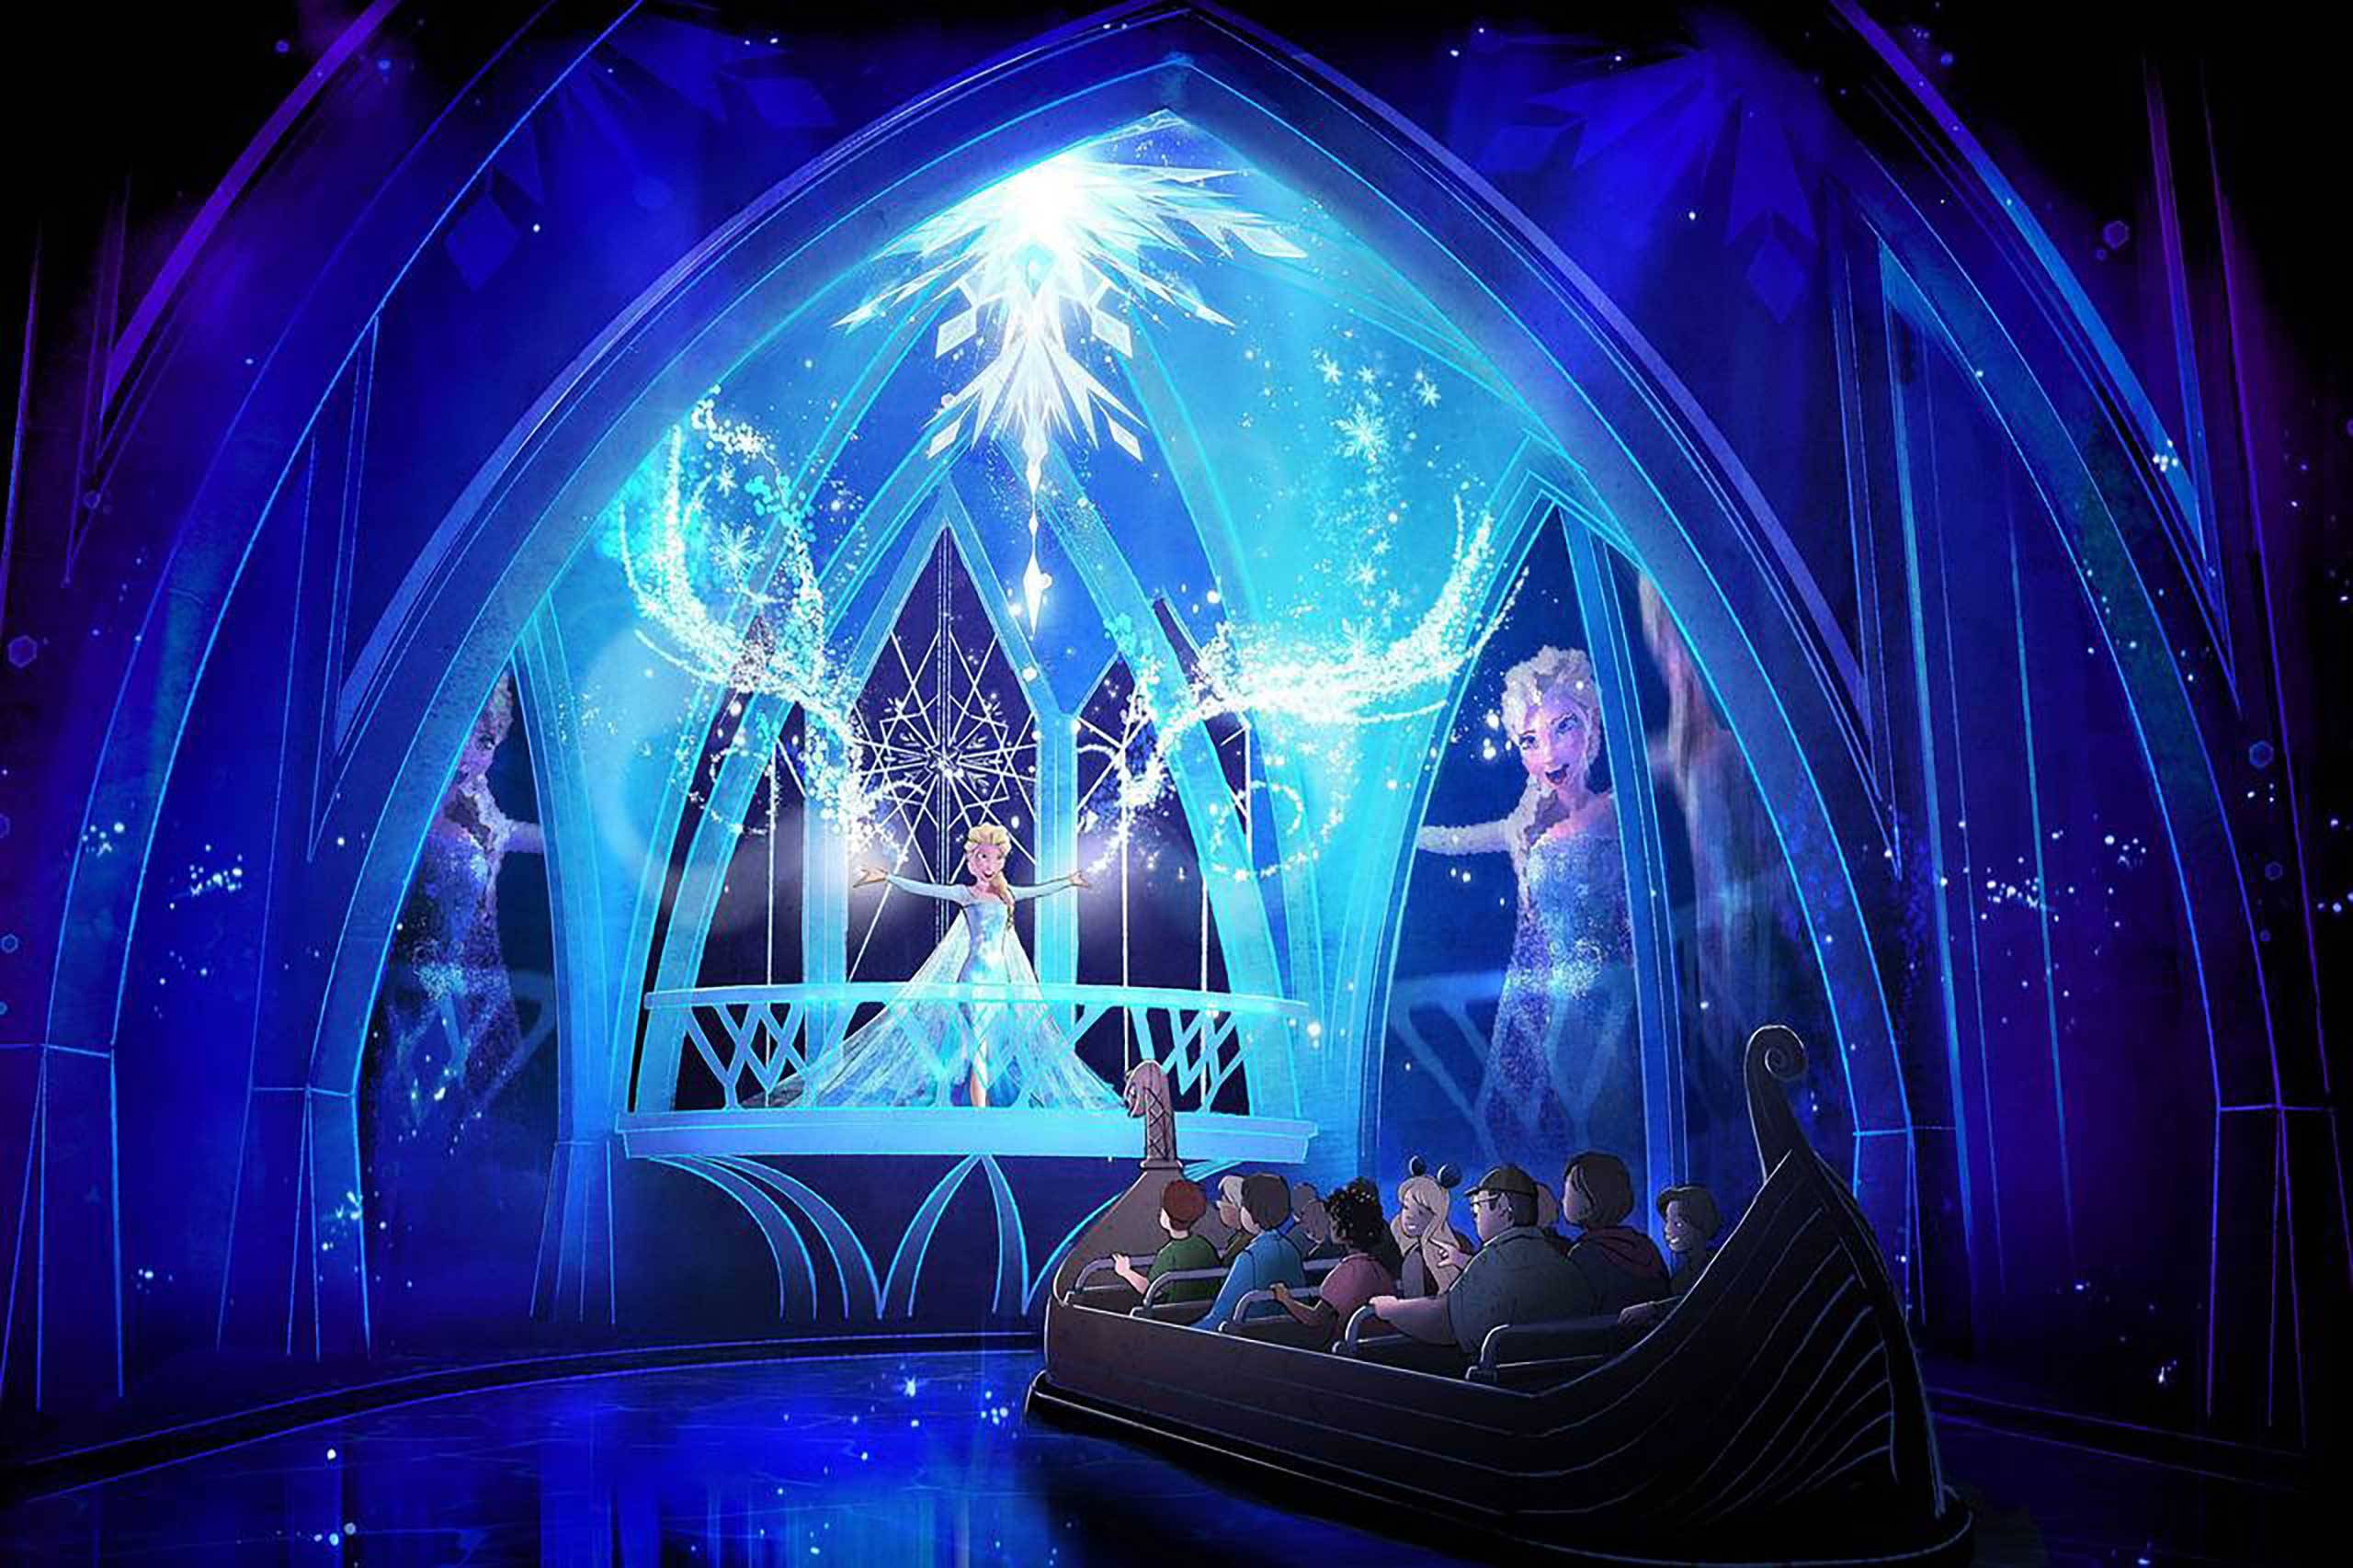 'Frozen Ever After' to be the name of Epcot's reworked Maelstrom ride